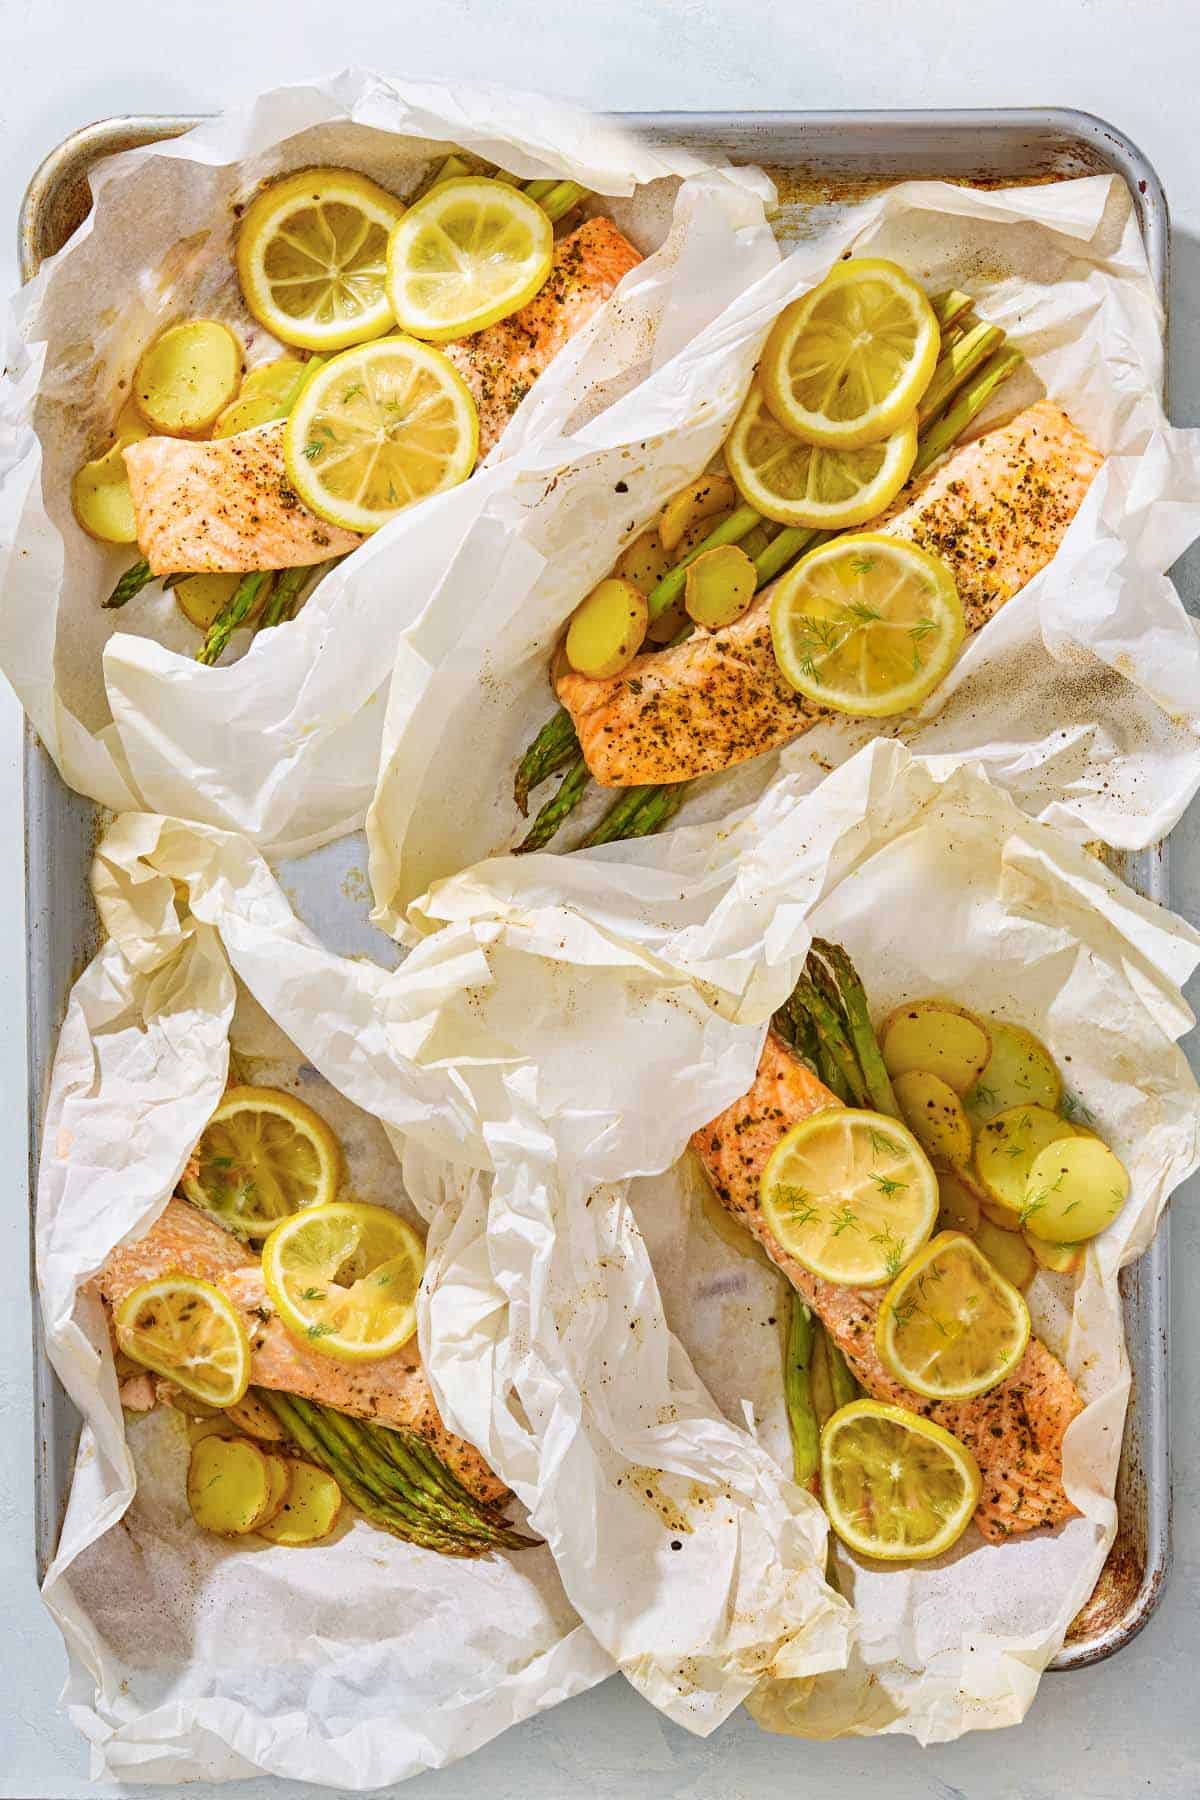 4 open salmon en papillote topped with lemon wheels on beds of asparagus and potatoes on a baking sheet.